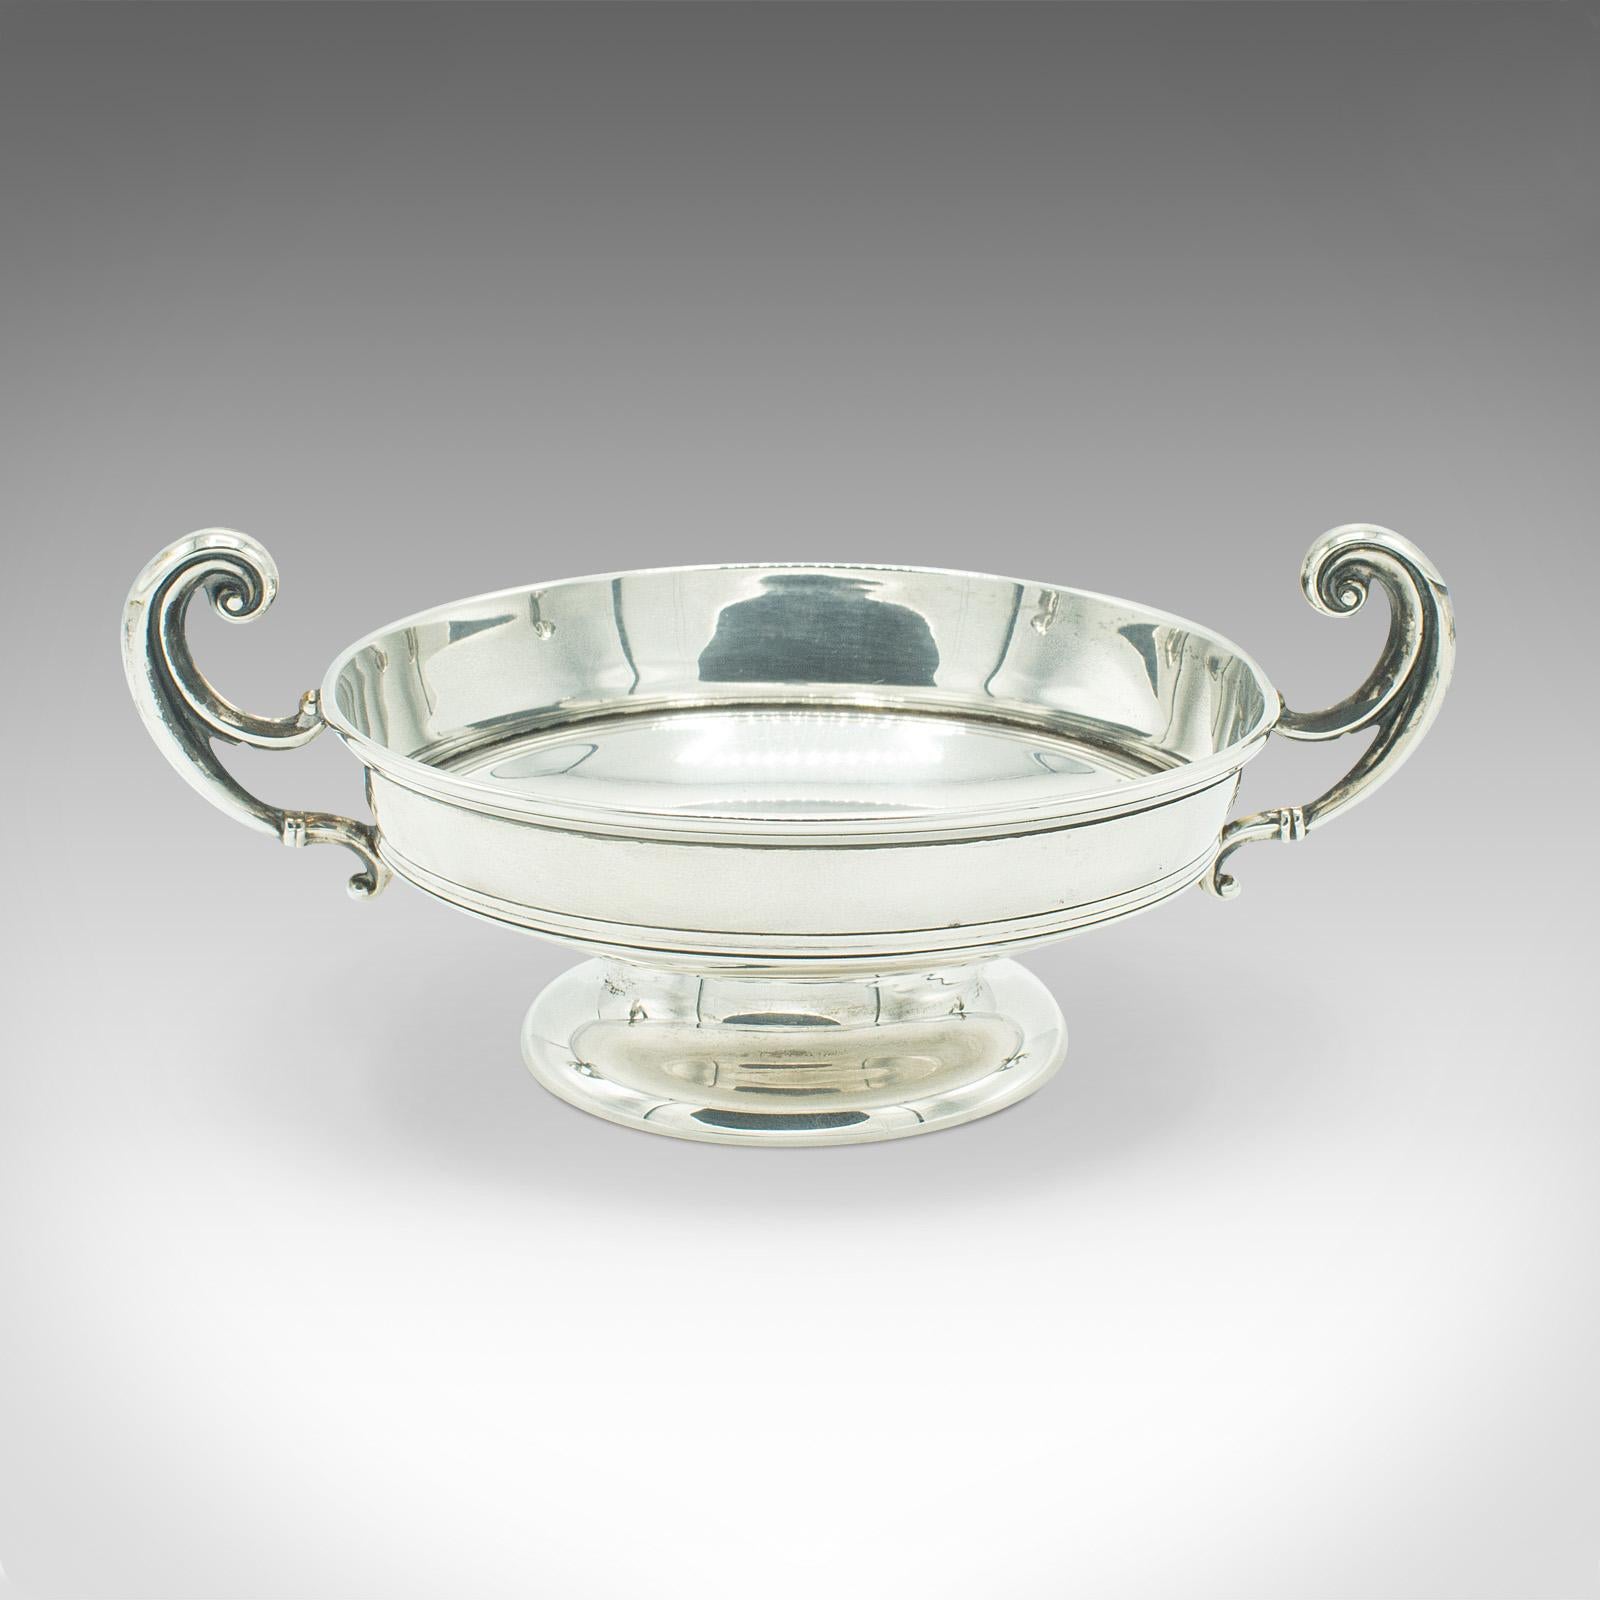 British Pair of Antique Bonbon Dishes, English, Sterling Silver, Serving Bowl, Edwardian For Sale